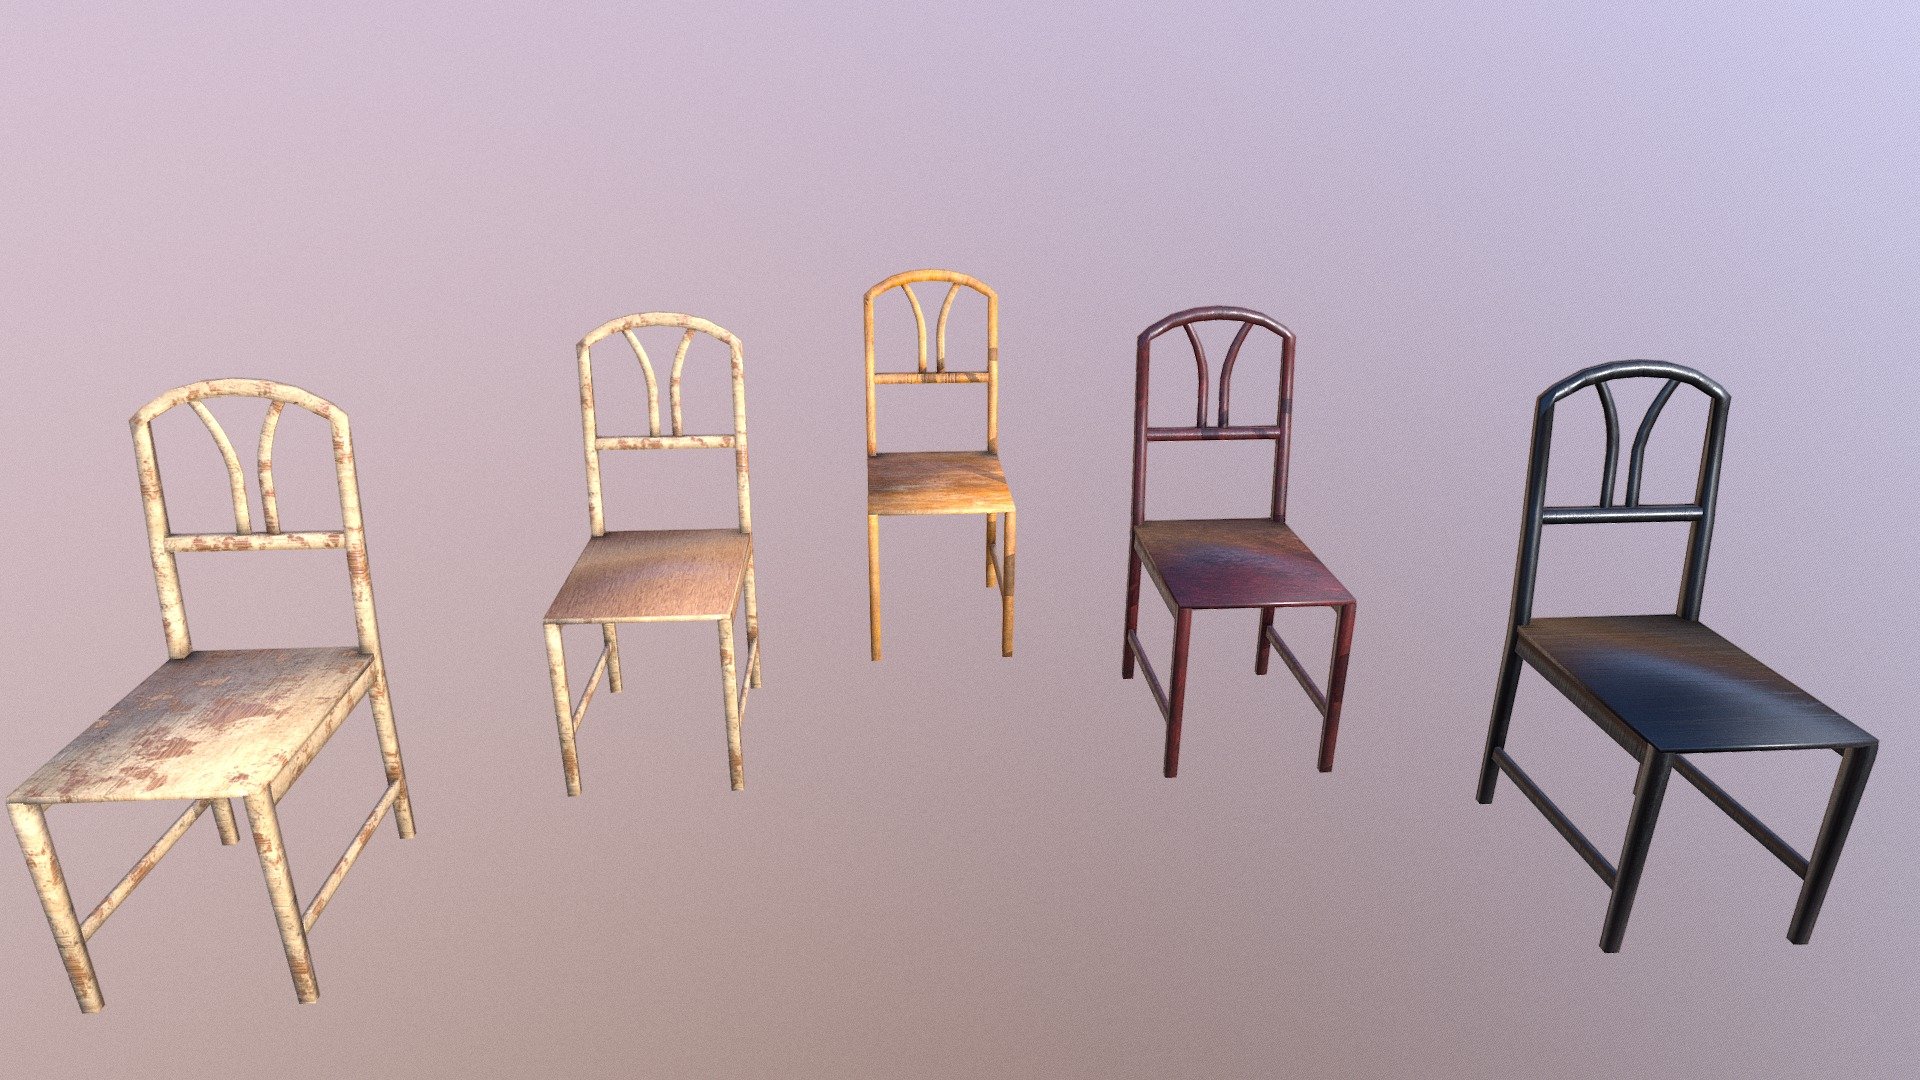 Download this Chair that is inspired from the medieval era of the noblemen and it was handcrafted at insya.
This Chair M02 is part of the Marquis Collection of Medieval Furniture and Props.
This asset comes with 5 unique material textures: Black, Mocha, Rustic, Tortilla and Antique.
This asset is bundled with textures for: Blender, Unity3D, Unreal Engine 4, and any other 3D Modelling Software such as Autodesk 3DS Max or Maya. 
Textures: 1K / PBR











 - Chair M02 - The Marquis Collection - Buy Royalty Free 3D model by insya 3d model